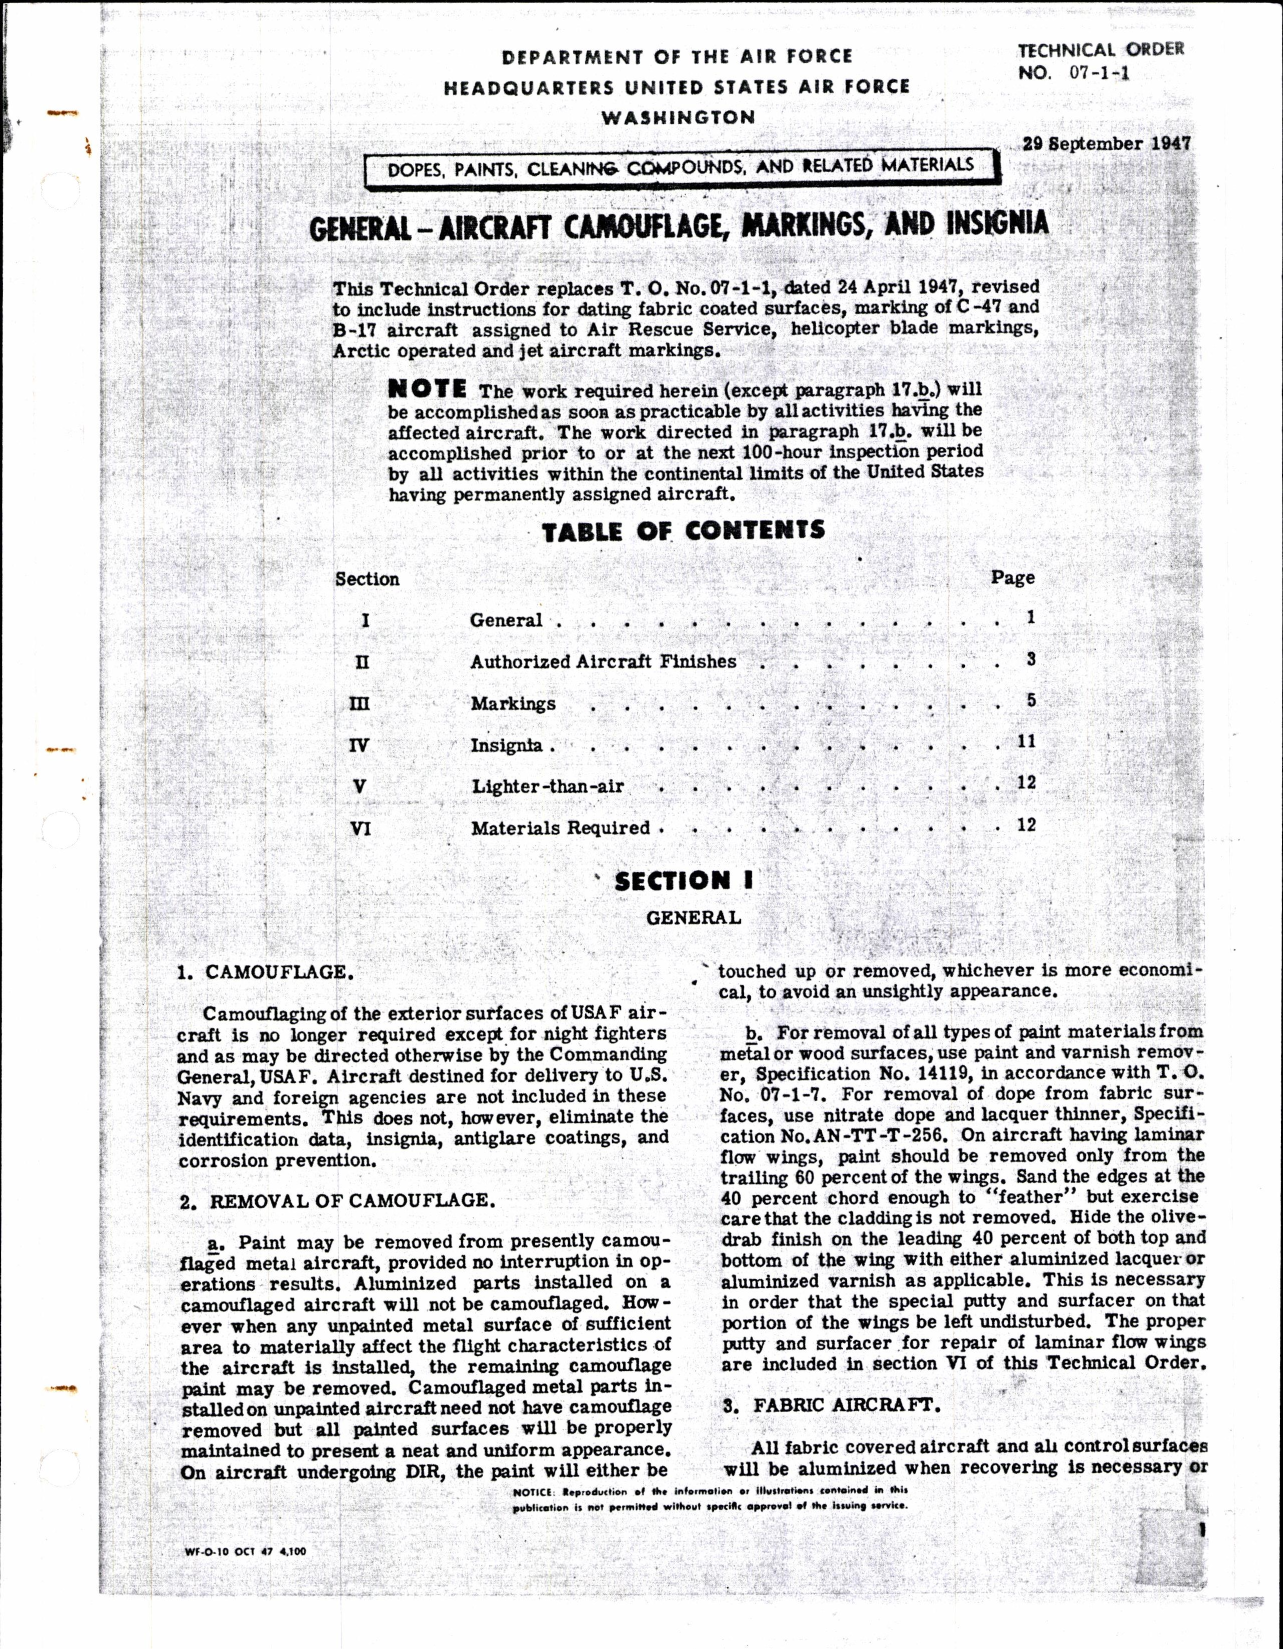 Sample page 1 from AirCorps Library document: General - Aircraft Camouflage, Markings, and Insignia